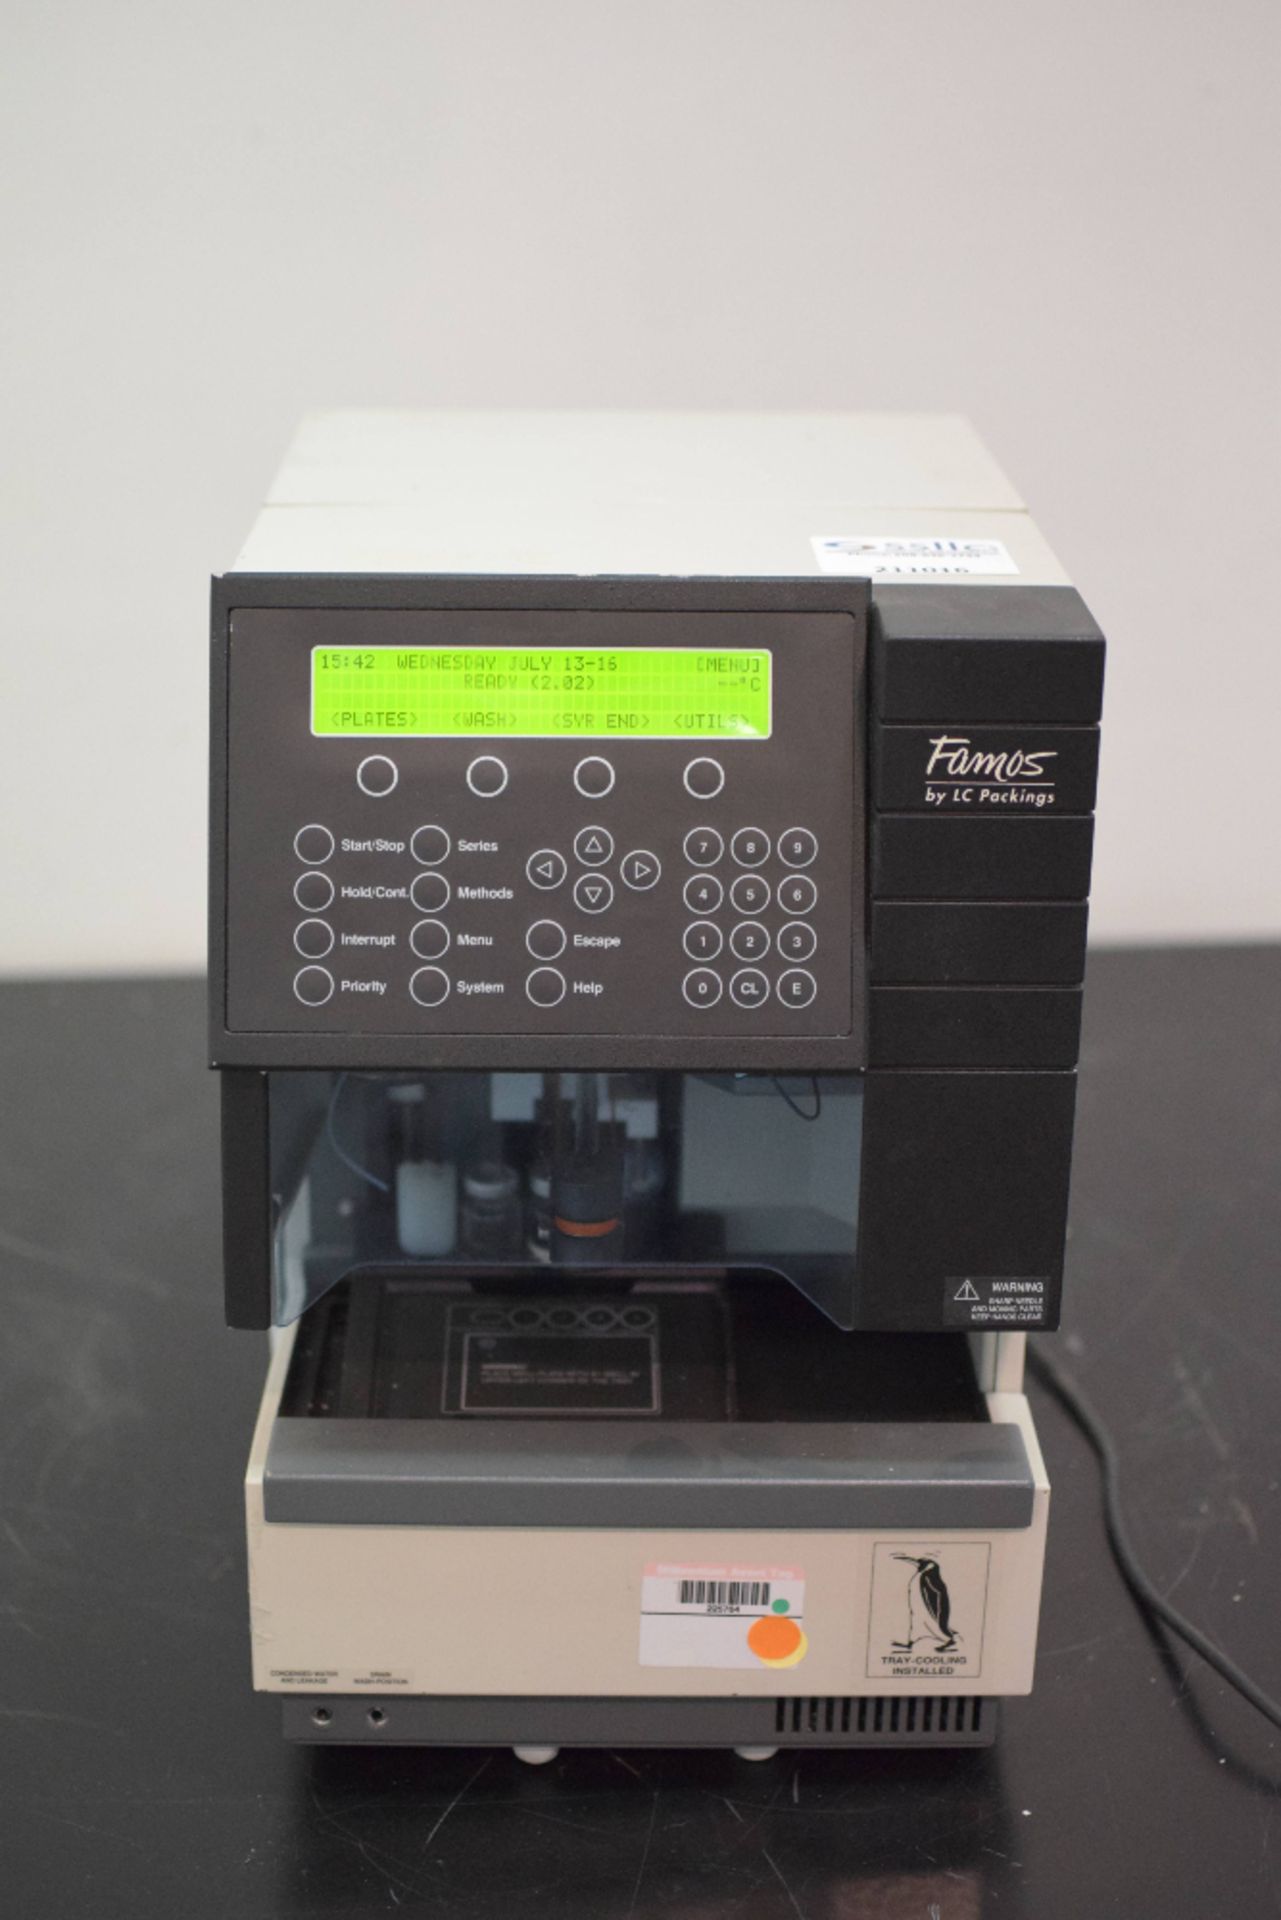 LC Packings 920 Famos Well Plate Autosampler